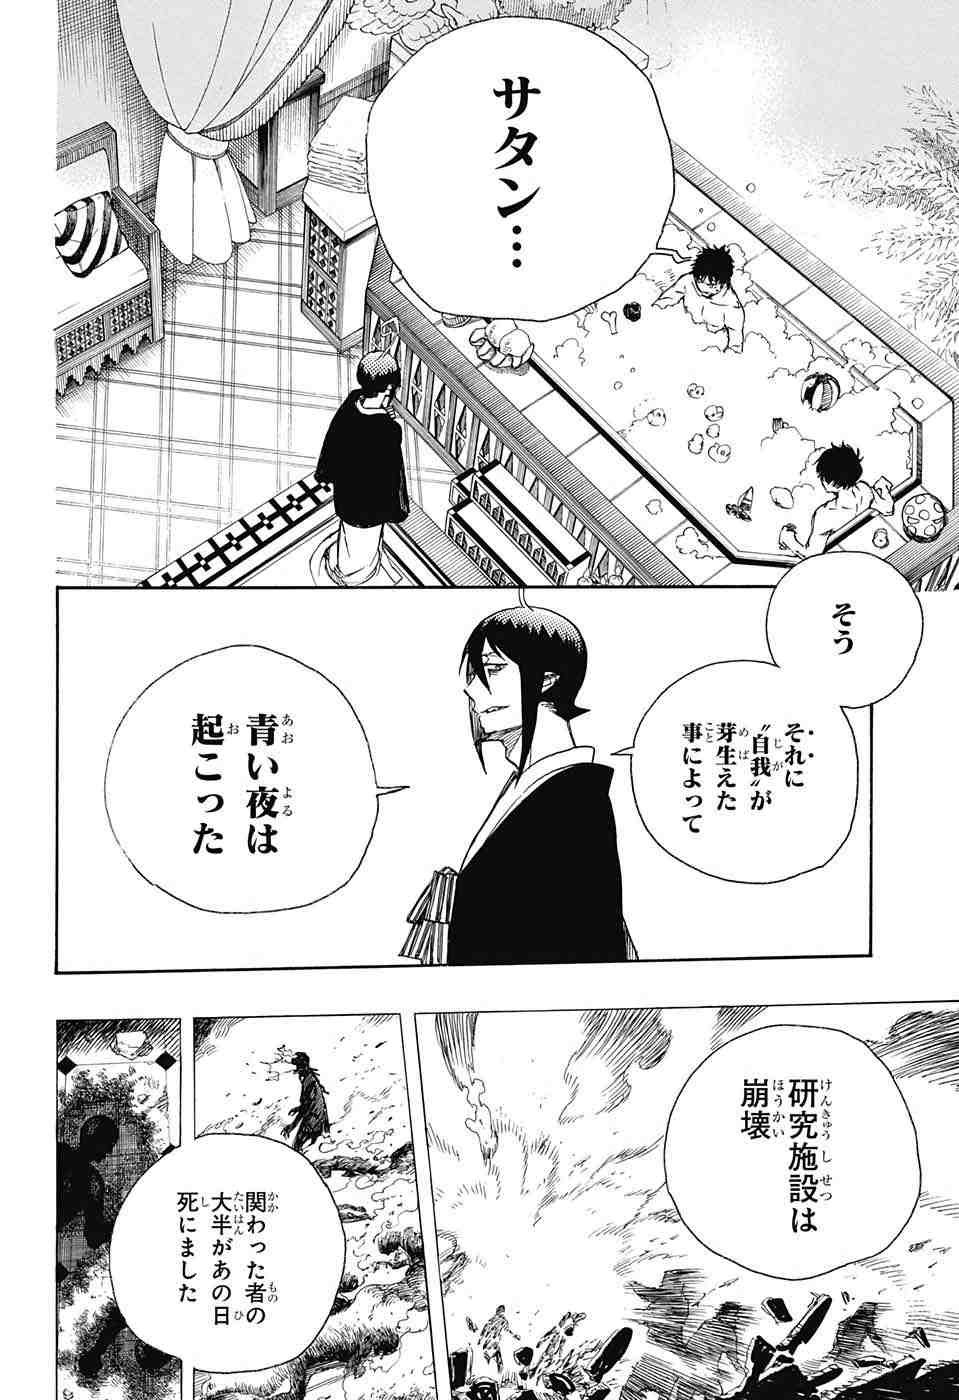 Ao no Exorcist - Chapter 87 - Page 2